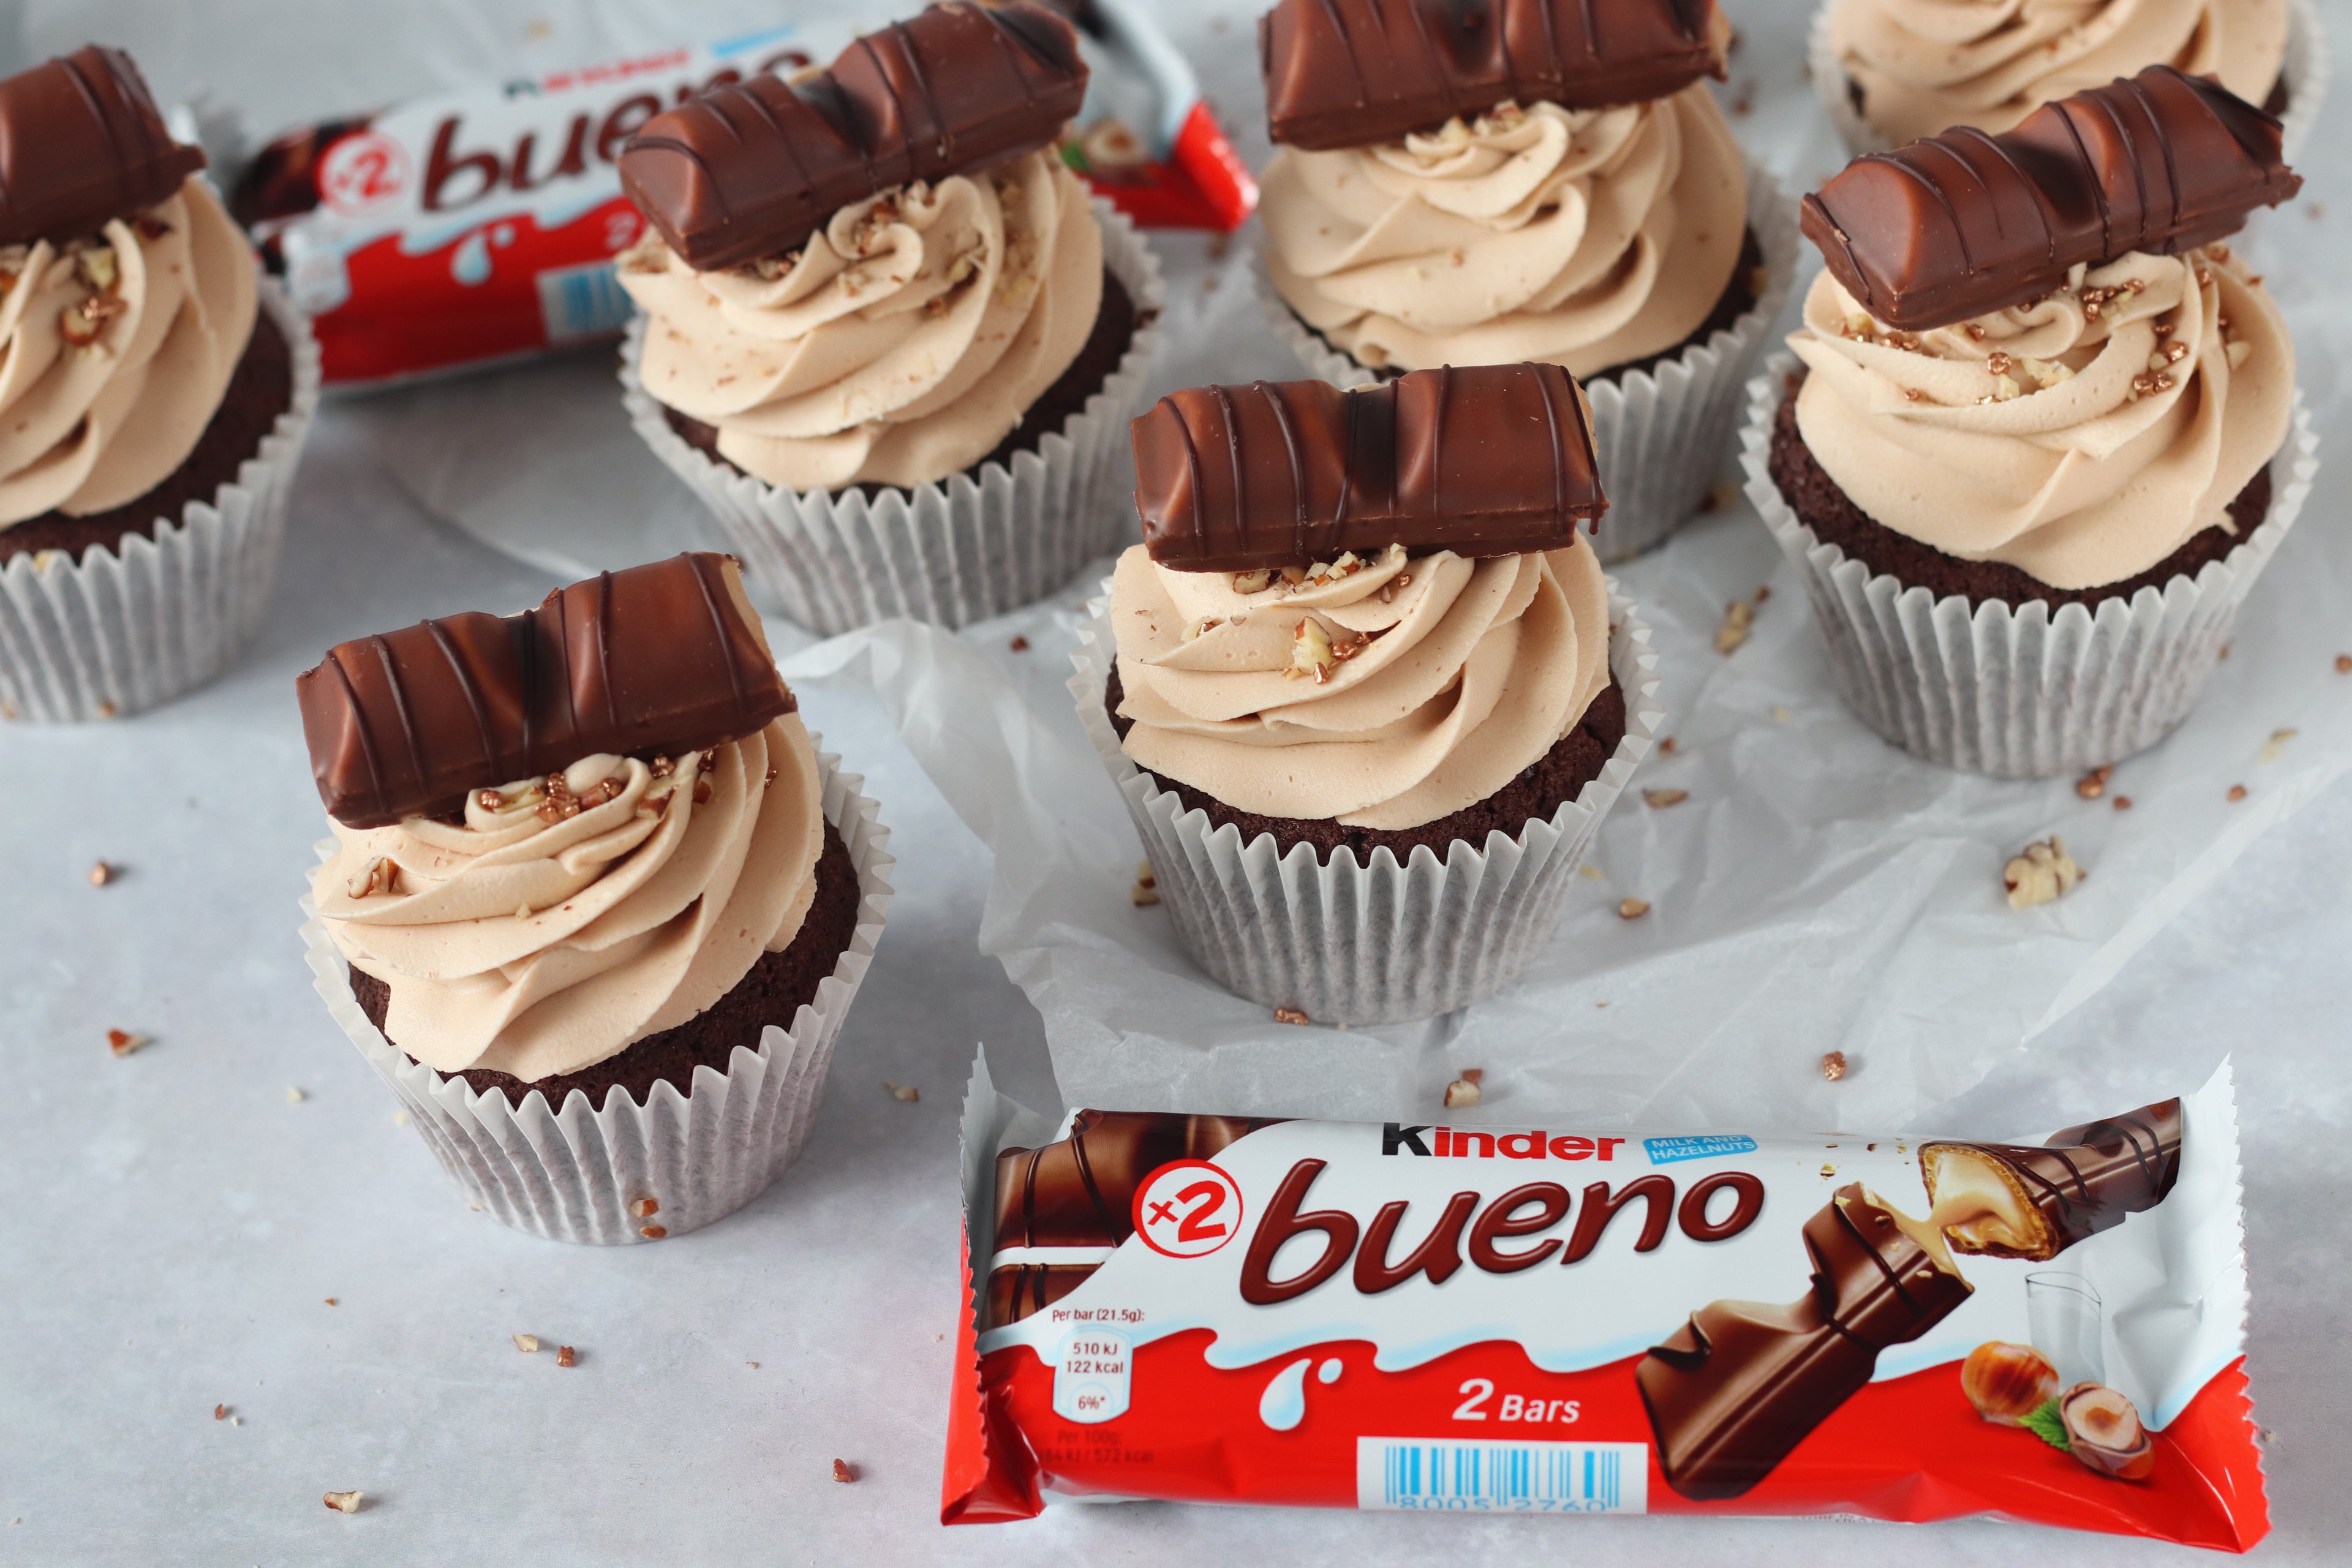 Kinder Bueno Cupcakes in row with chocolate bar